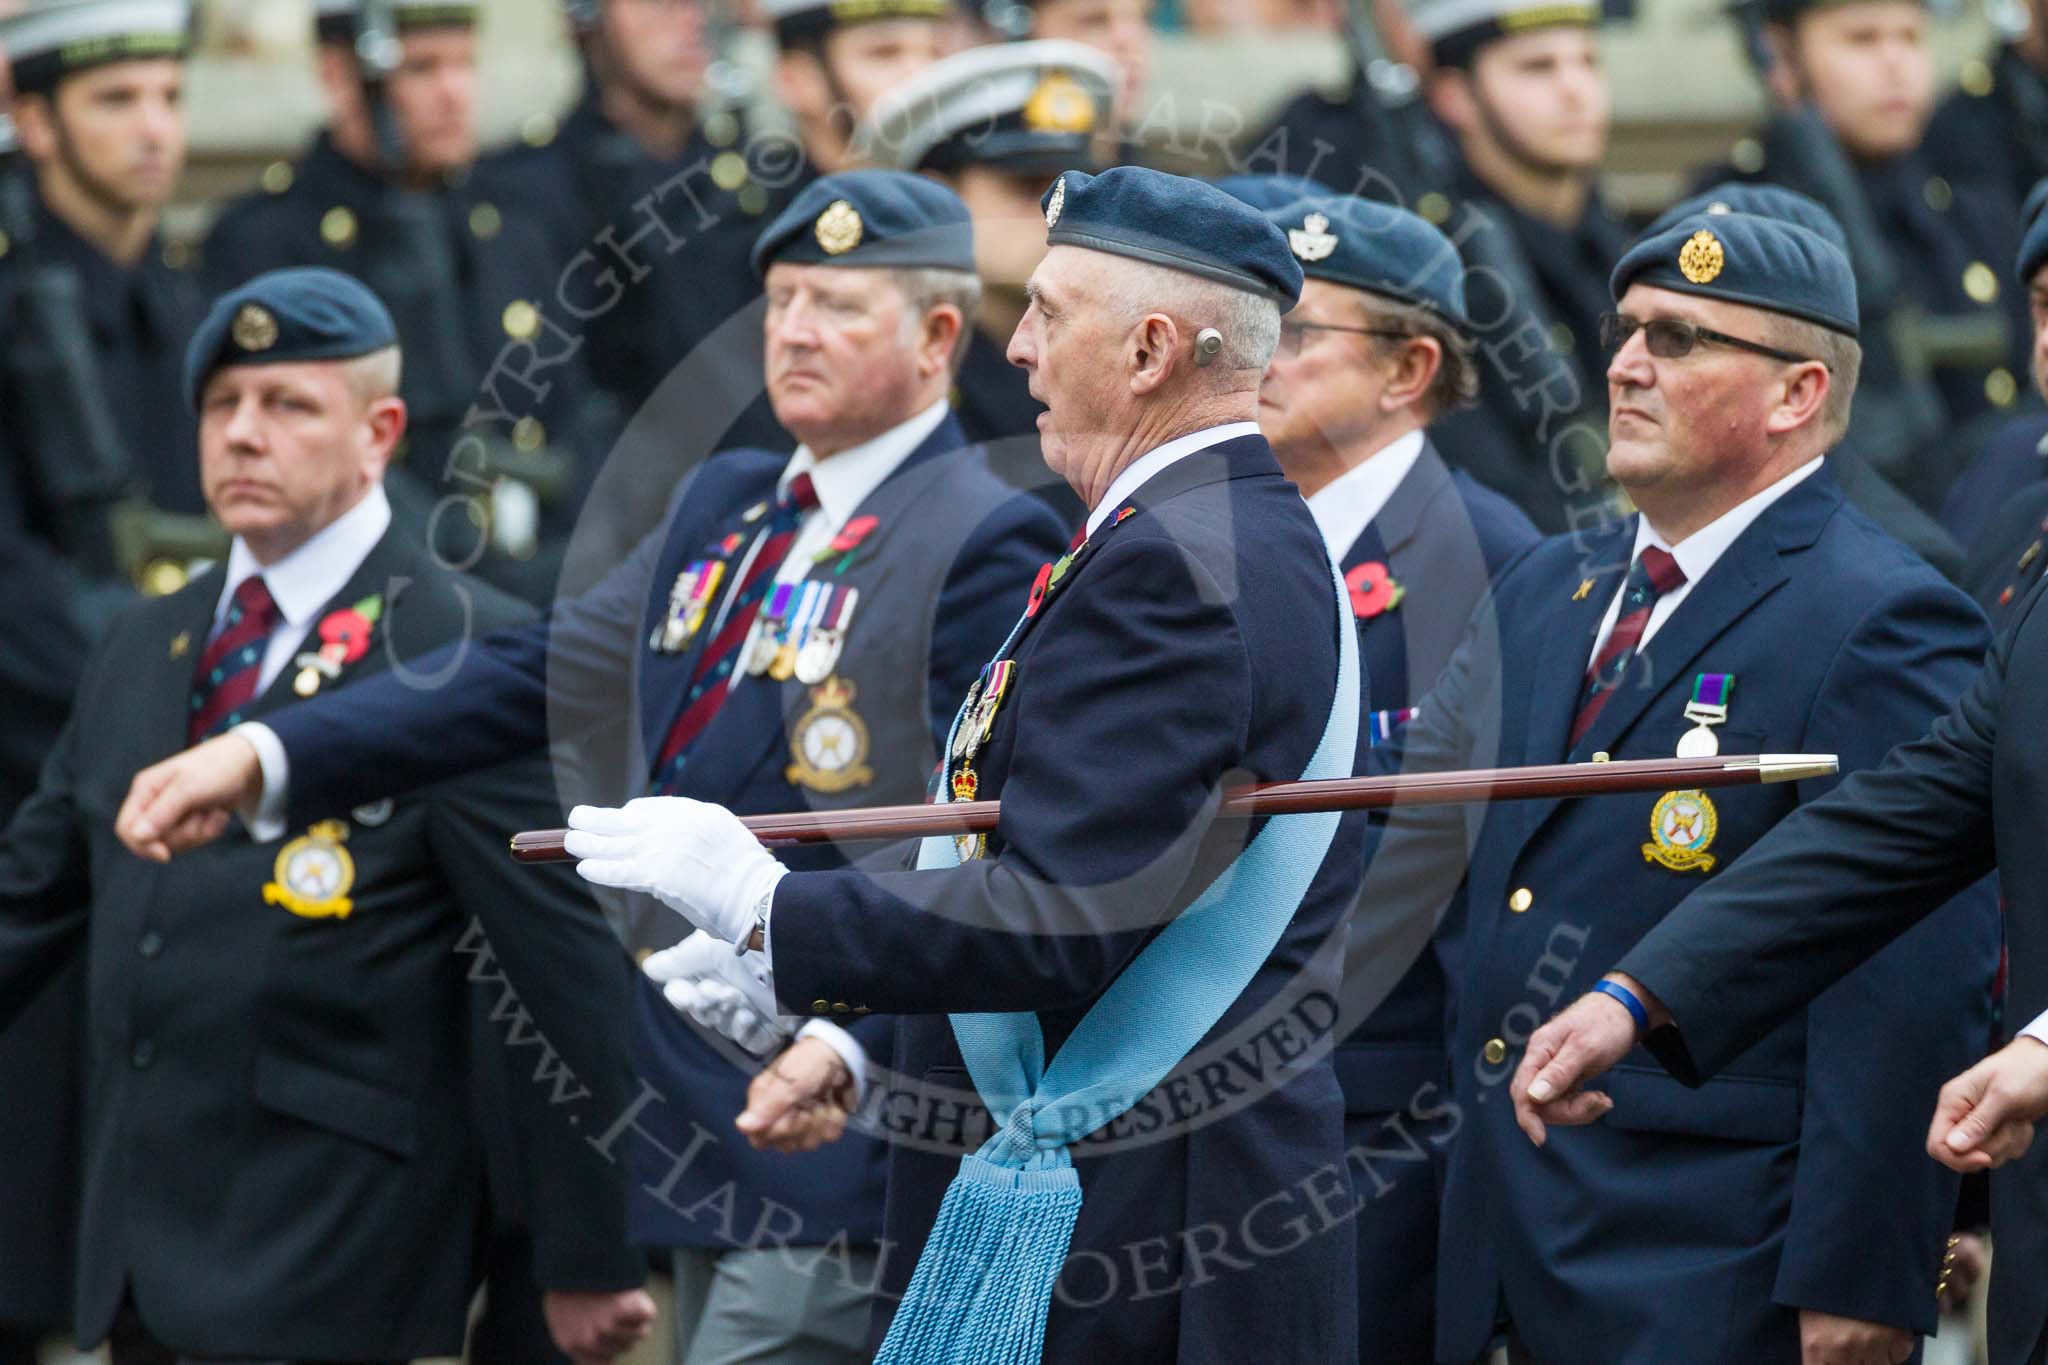 Remembrance Sunday at the Cenotaph 2015: C2, Royal Air Force Regiment Association.
Cenotaph, Whitehall, London SW1,
London,
Greater London,
United Kingdom,
on 08 November 2015 at 11:47, image #427